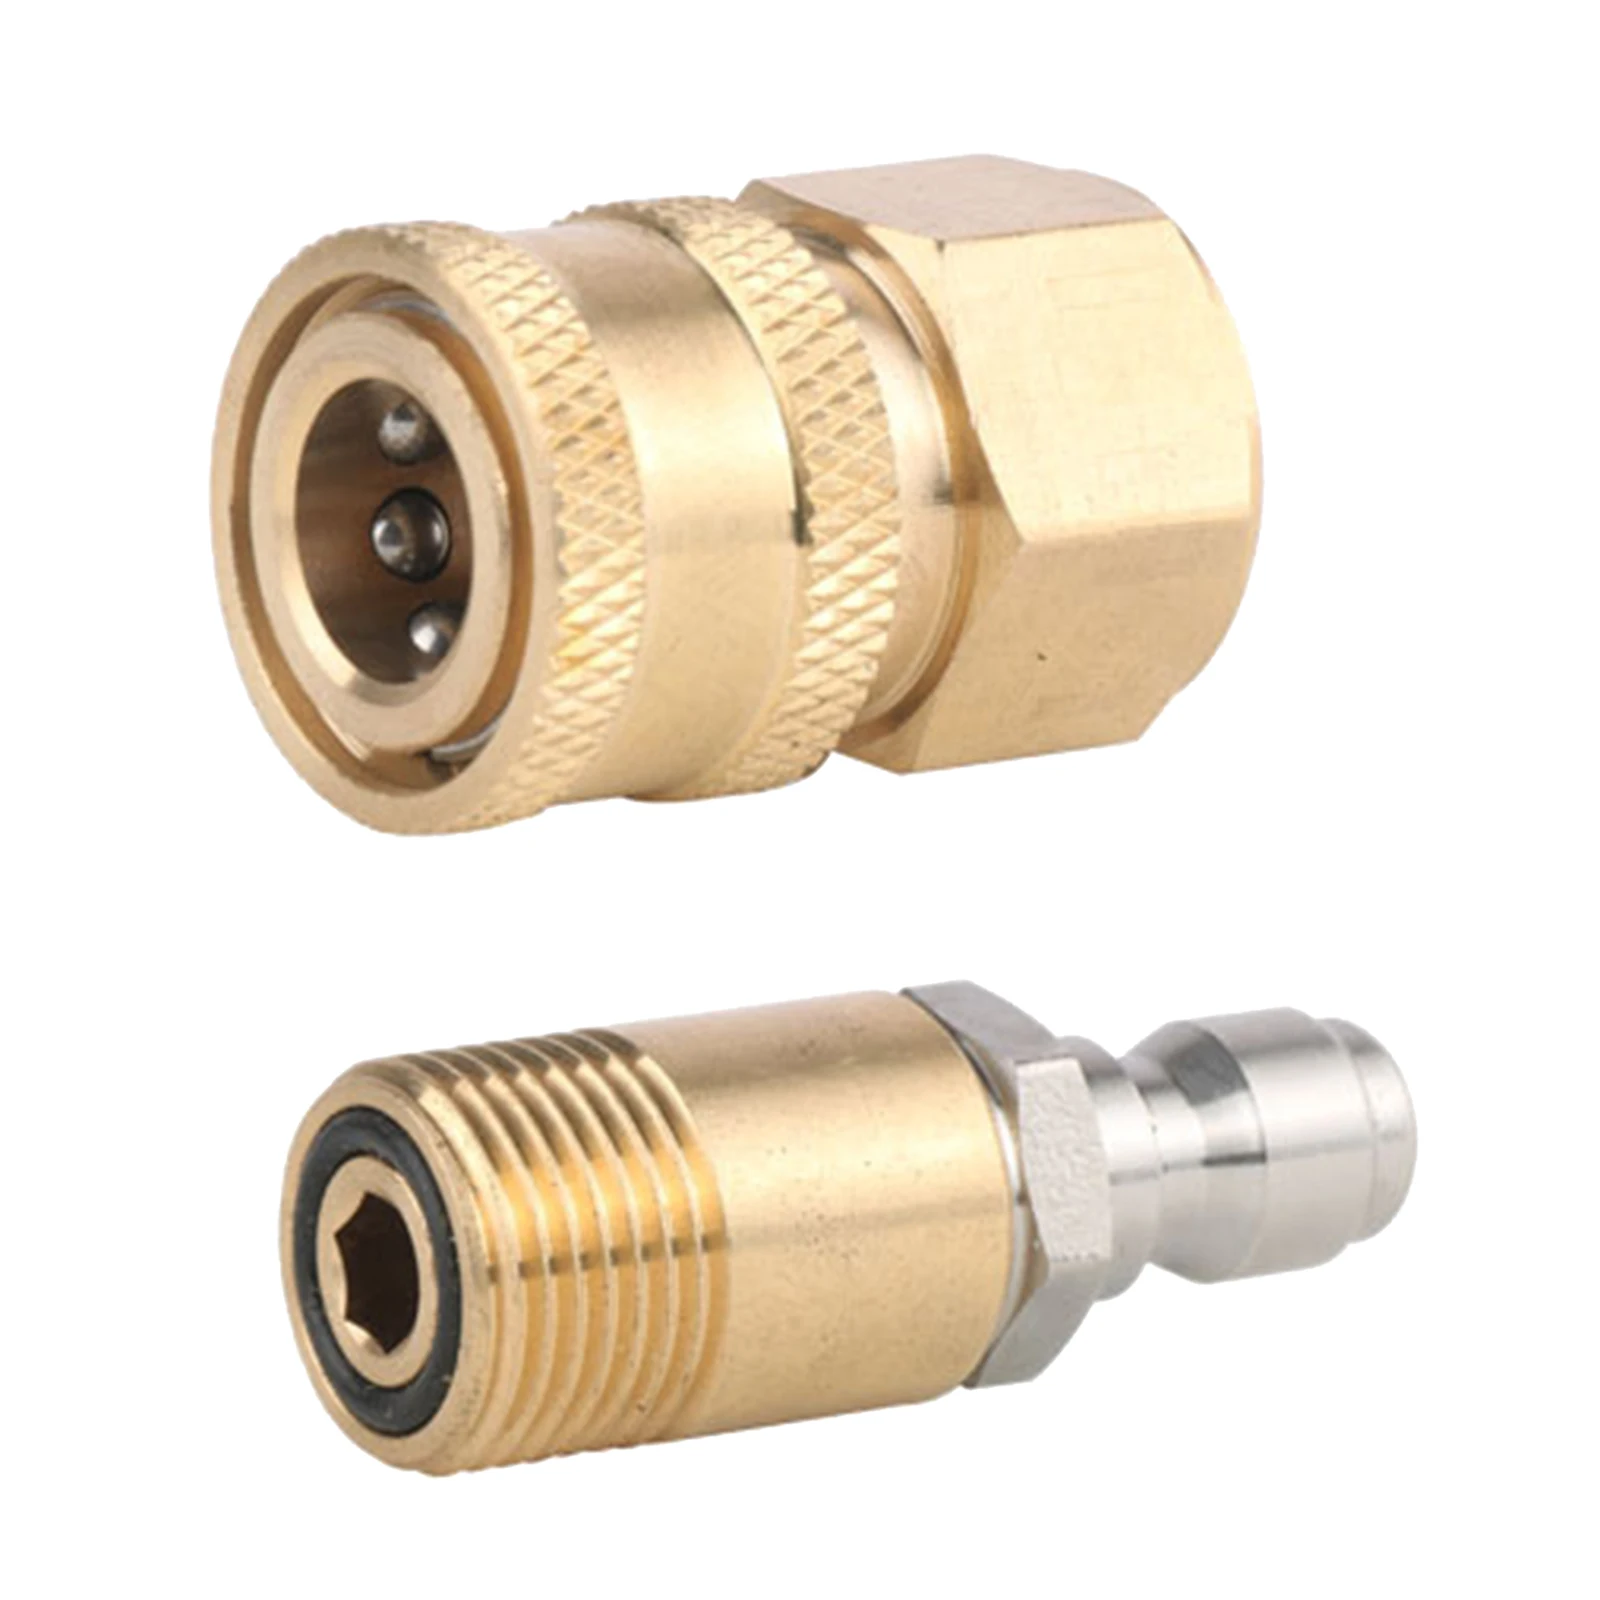 Pressure Washer Quick Connect Adapter Connector 12mm to 1/4 Male Coupling 